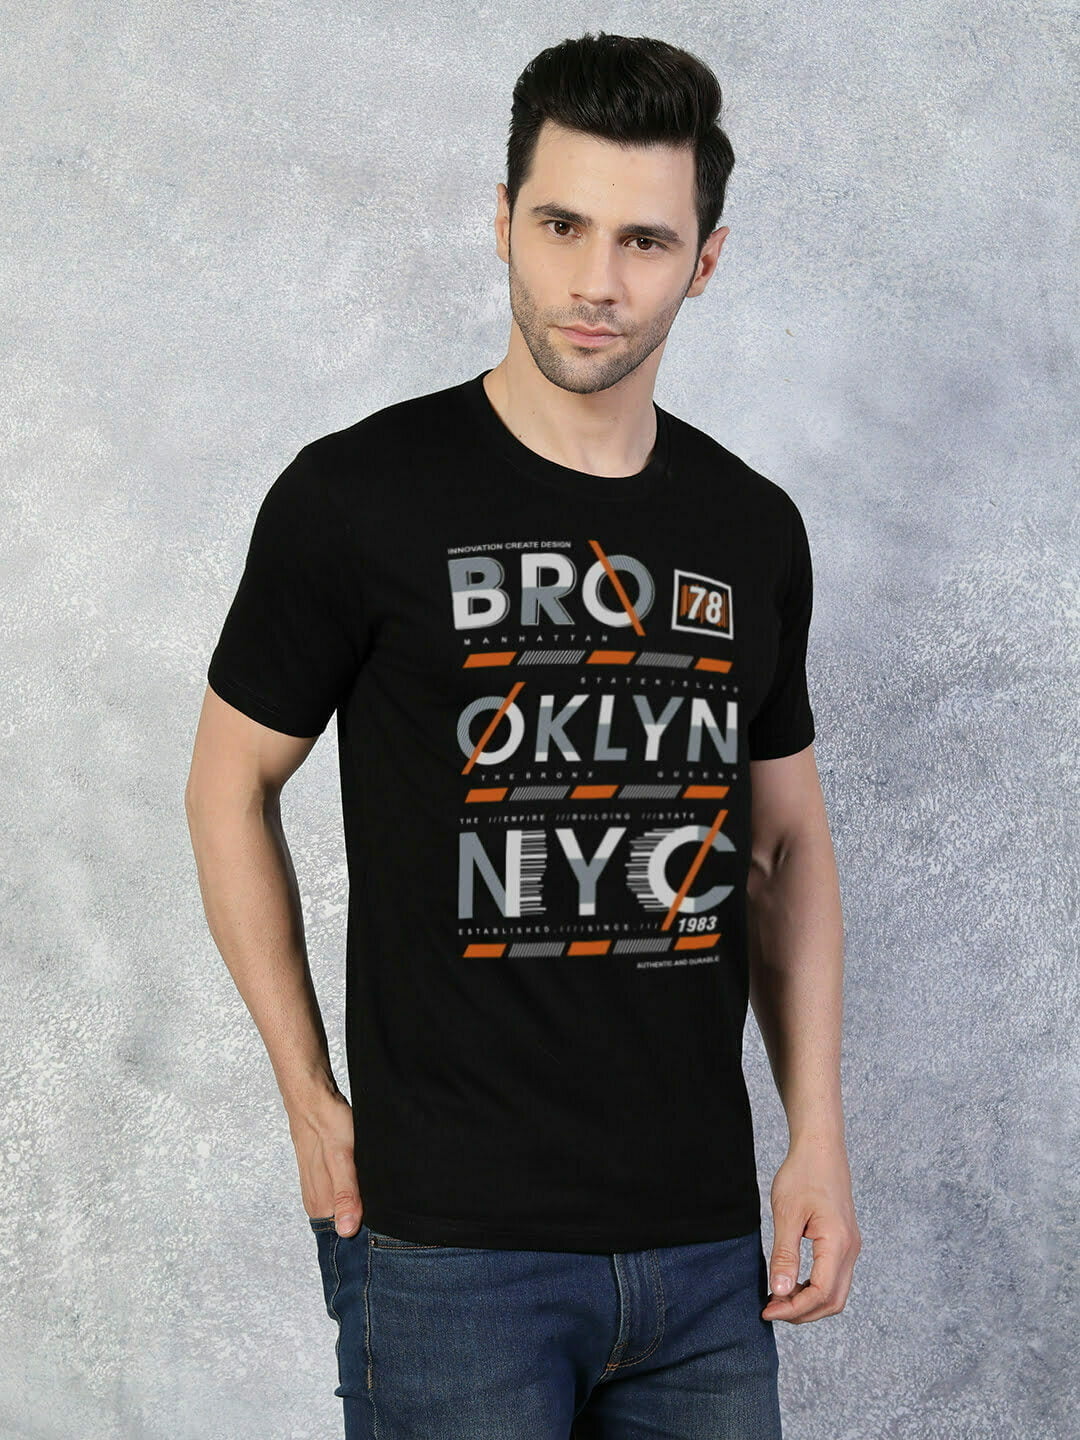 Buy The Bro-oklyn Nyc Graphic - The Black Lover